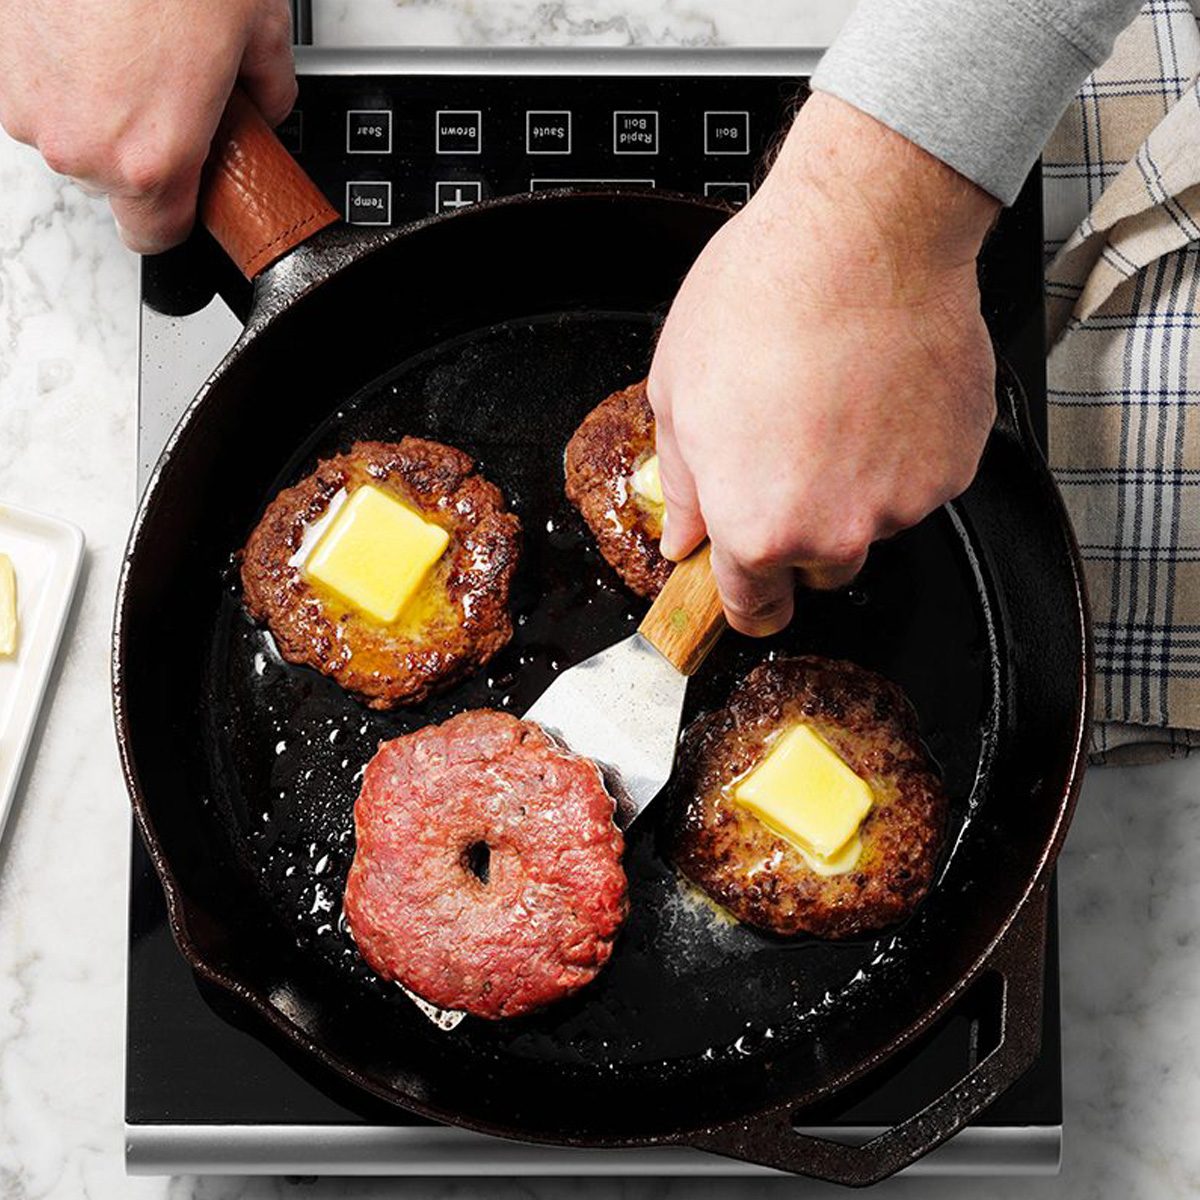 How to Cook Burgers on the Stove: Best Pan-Fried Burgers